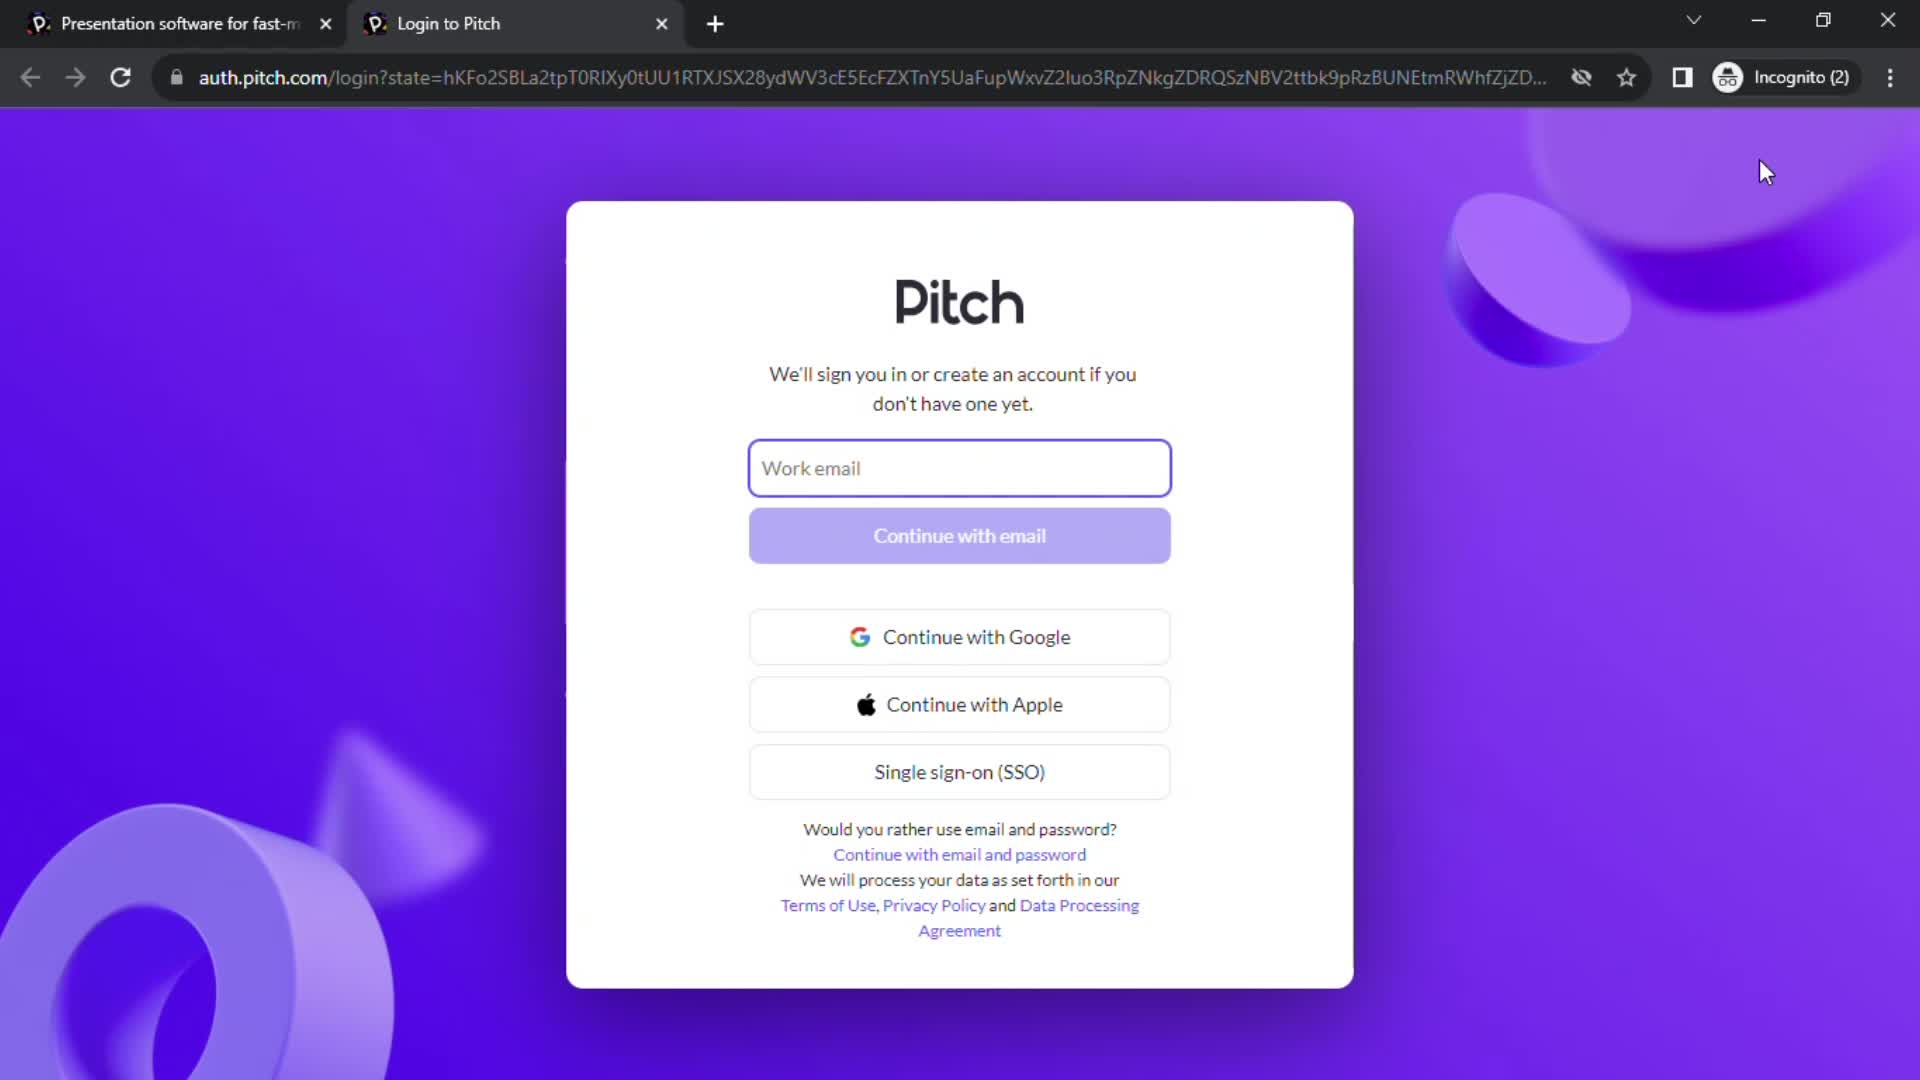 Screenshot of Sign up on Onboarding on Pitch user flow